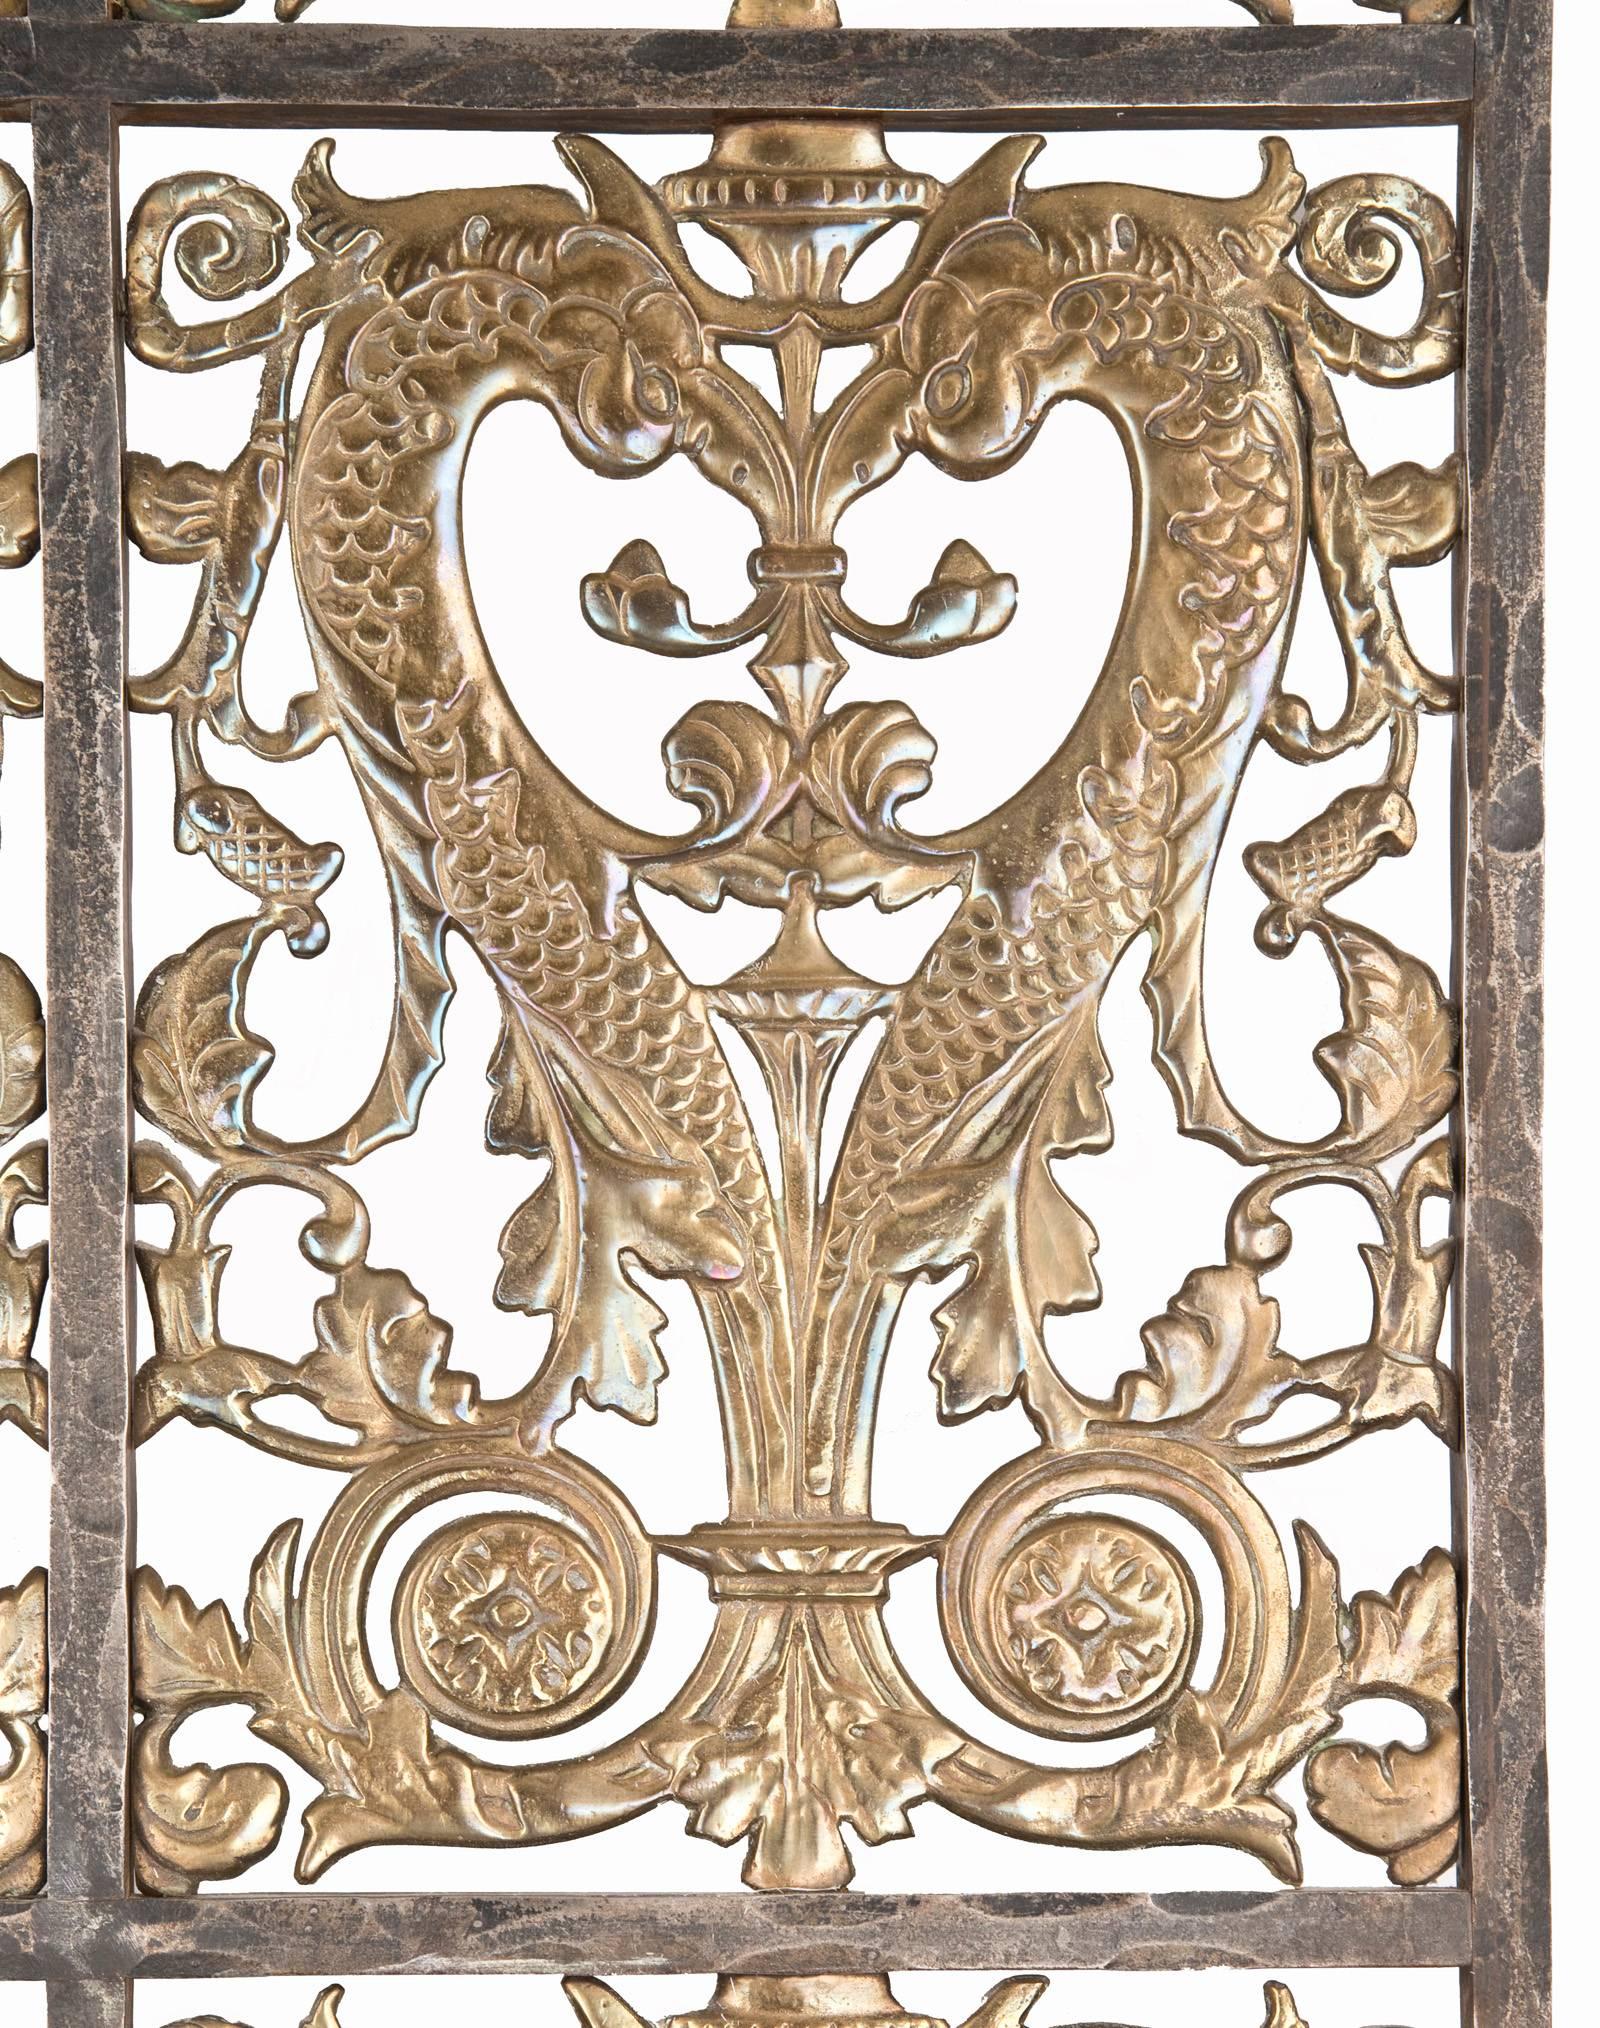 An imposing, yet elegant, pair of Art Deco entry gates constructed with an iron frame and repeating open panels of cast brass diving dolphins motif with thistles and scrolling foliate.